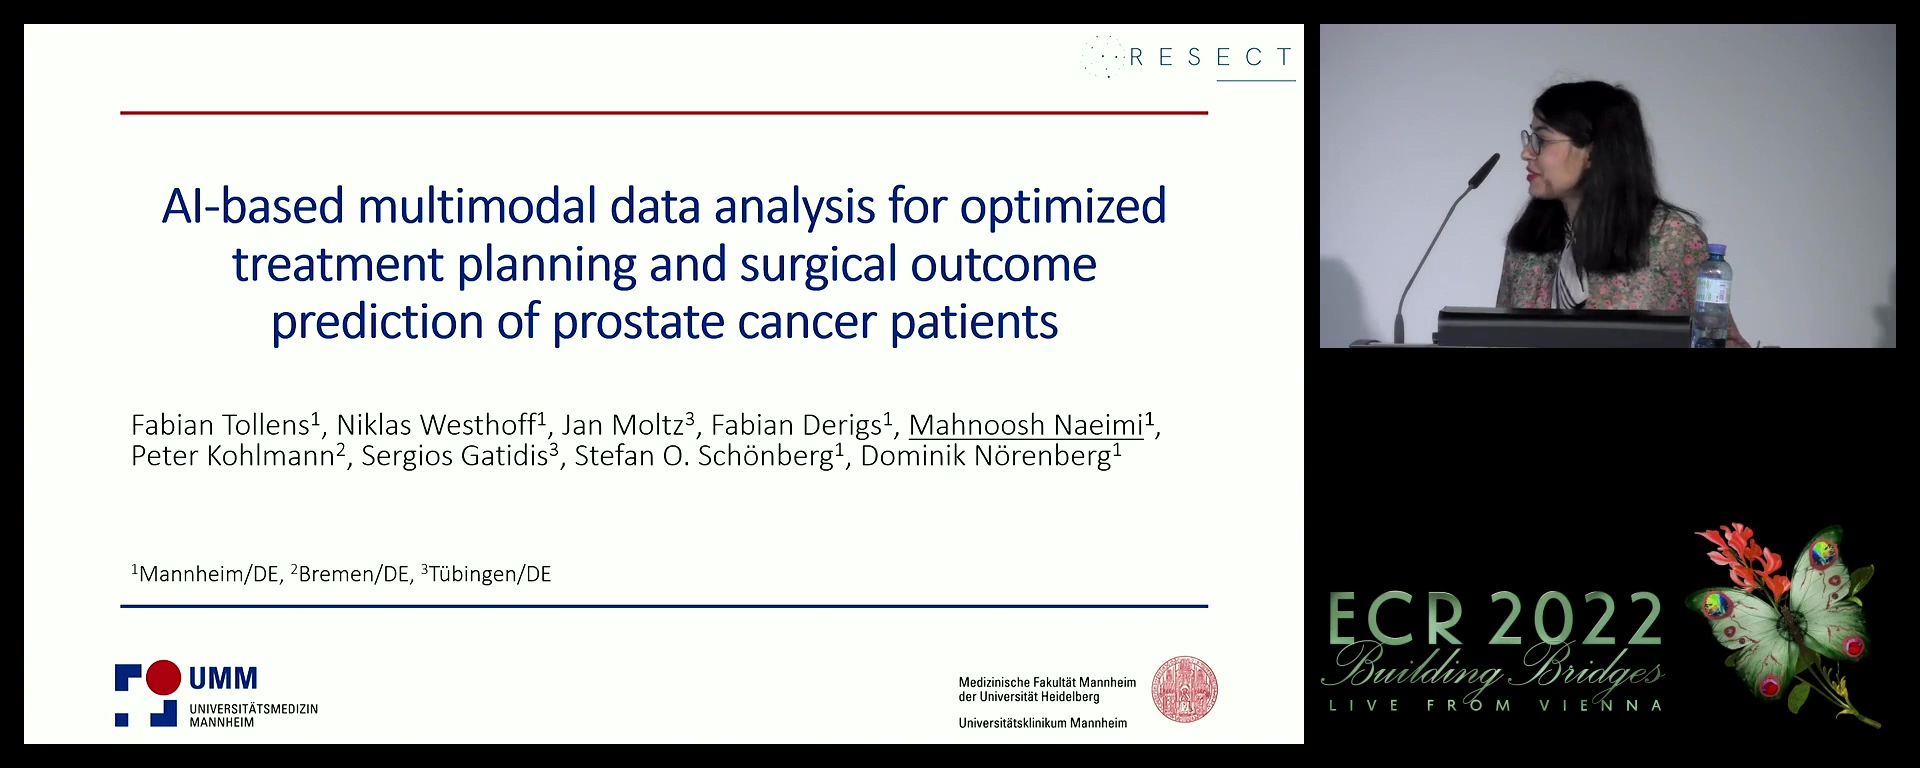 Machine learning-based multimodal data analysis for optimised treatment planning and surgical outcome prediction of prostate cancer patients - Mahnoosh Naeimi, Mannheim / DE